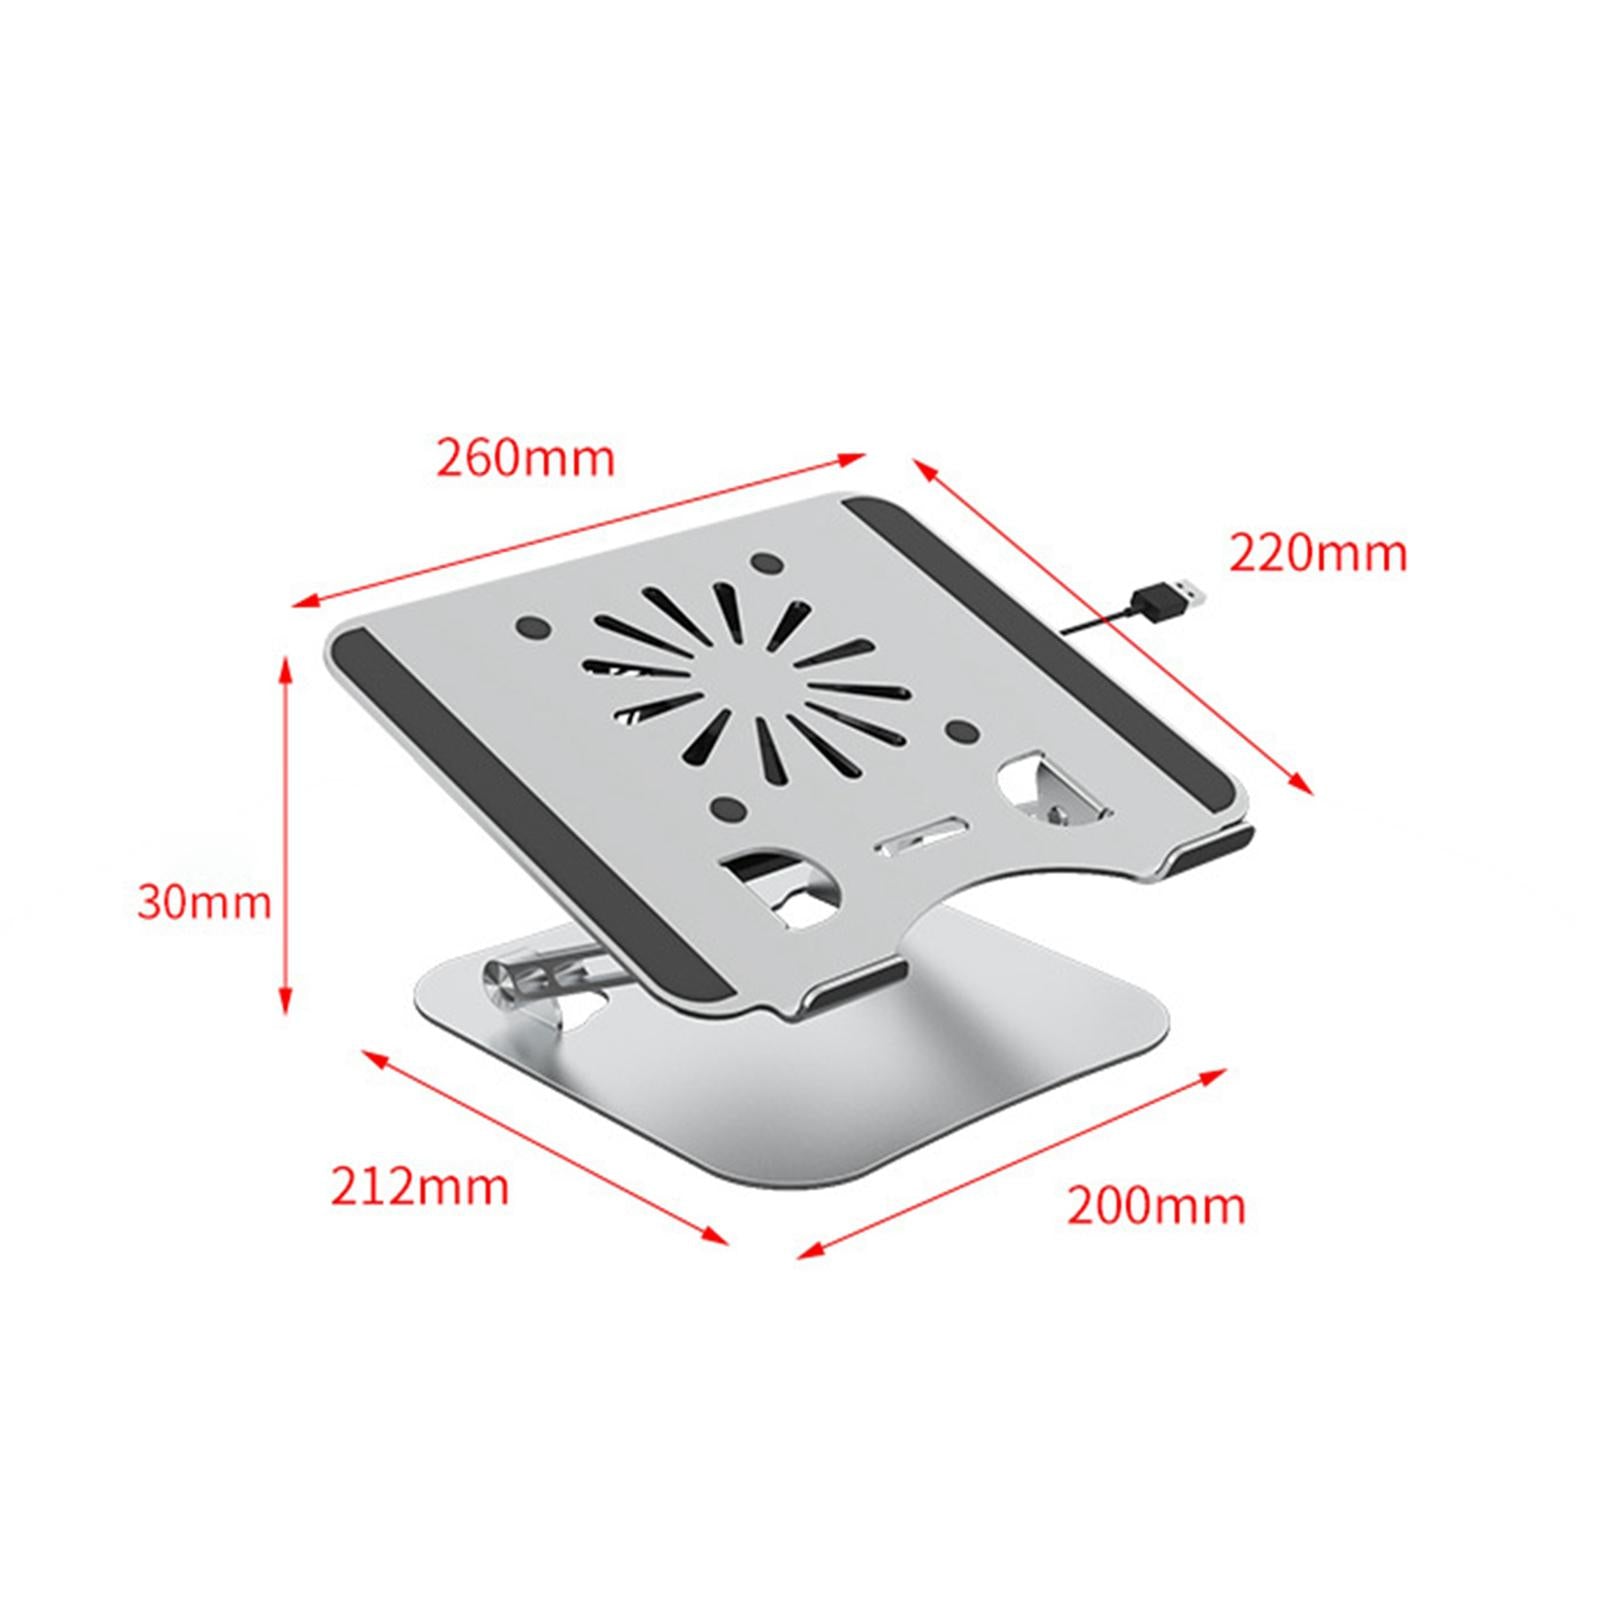 Laptop Stand with Cooling Fan Universal Aluminium Alloy Ergonomic for Home Argent